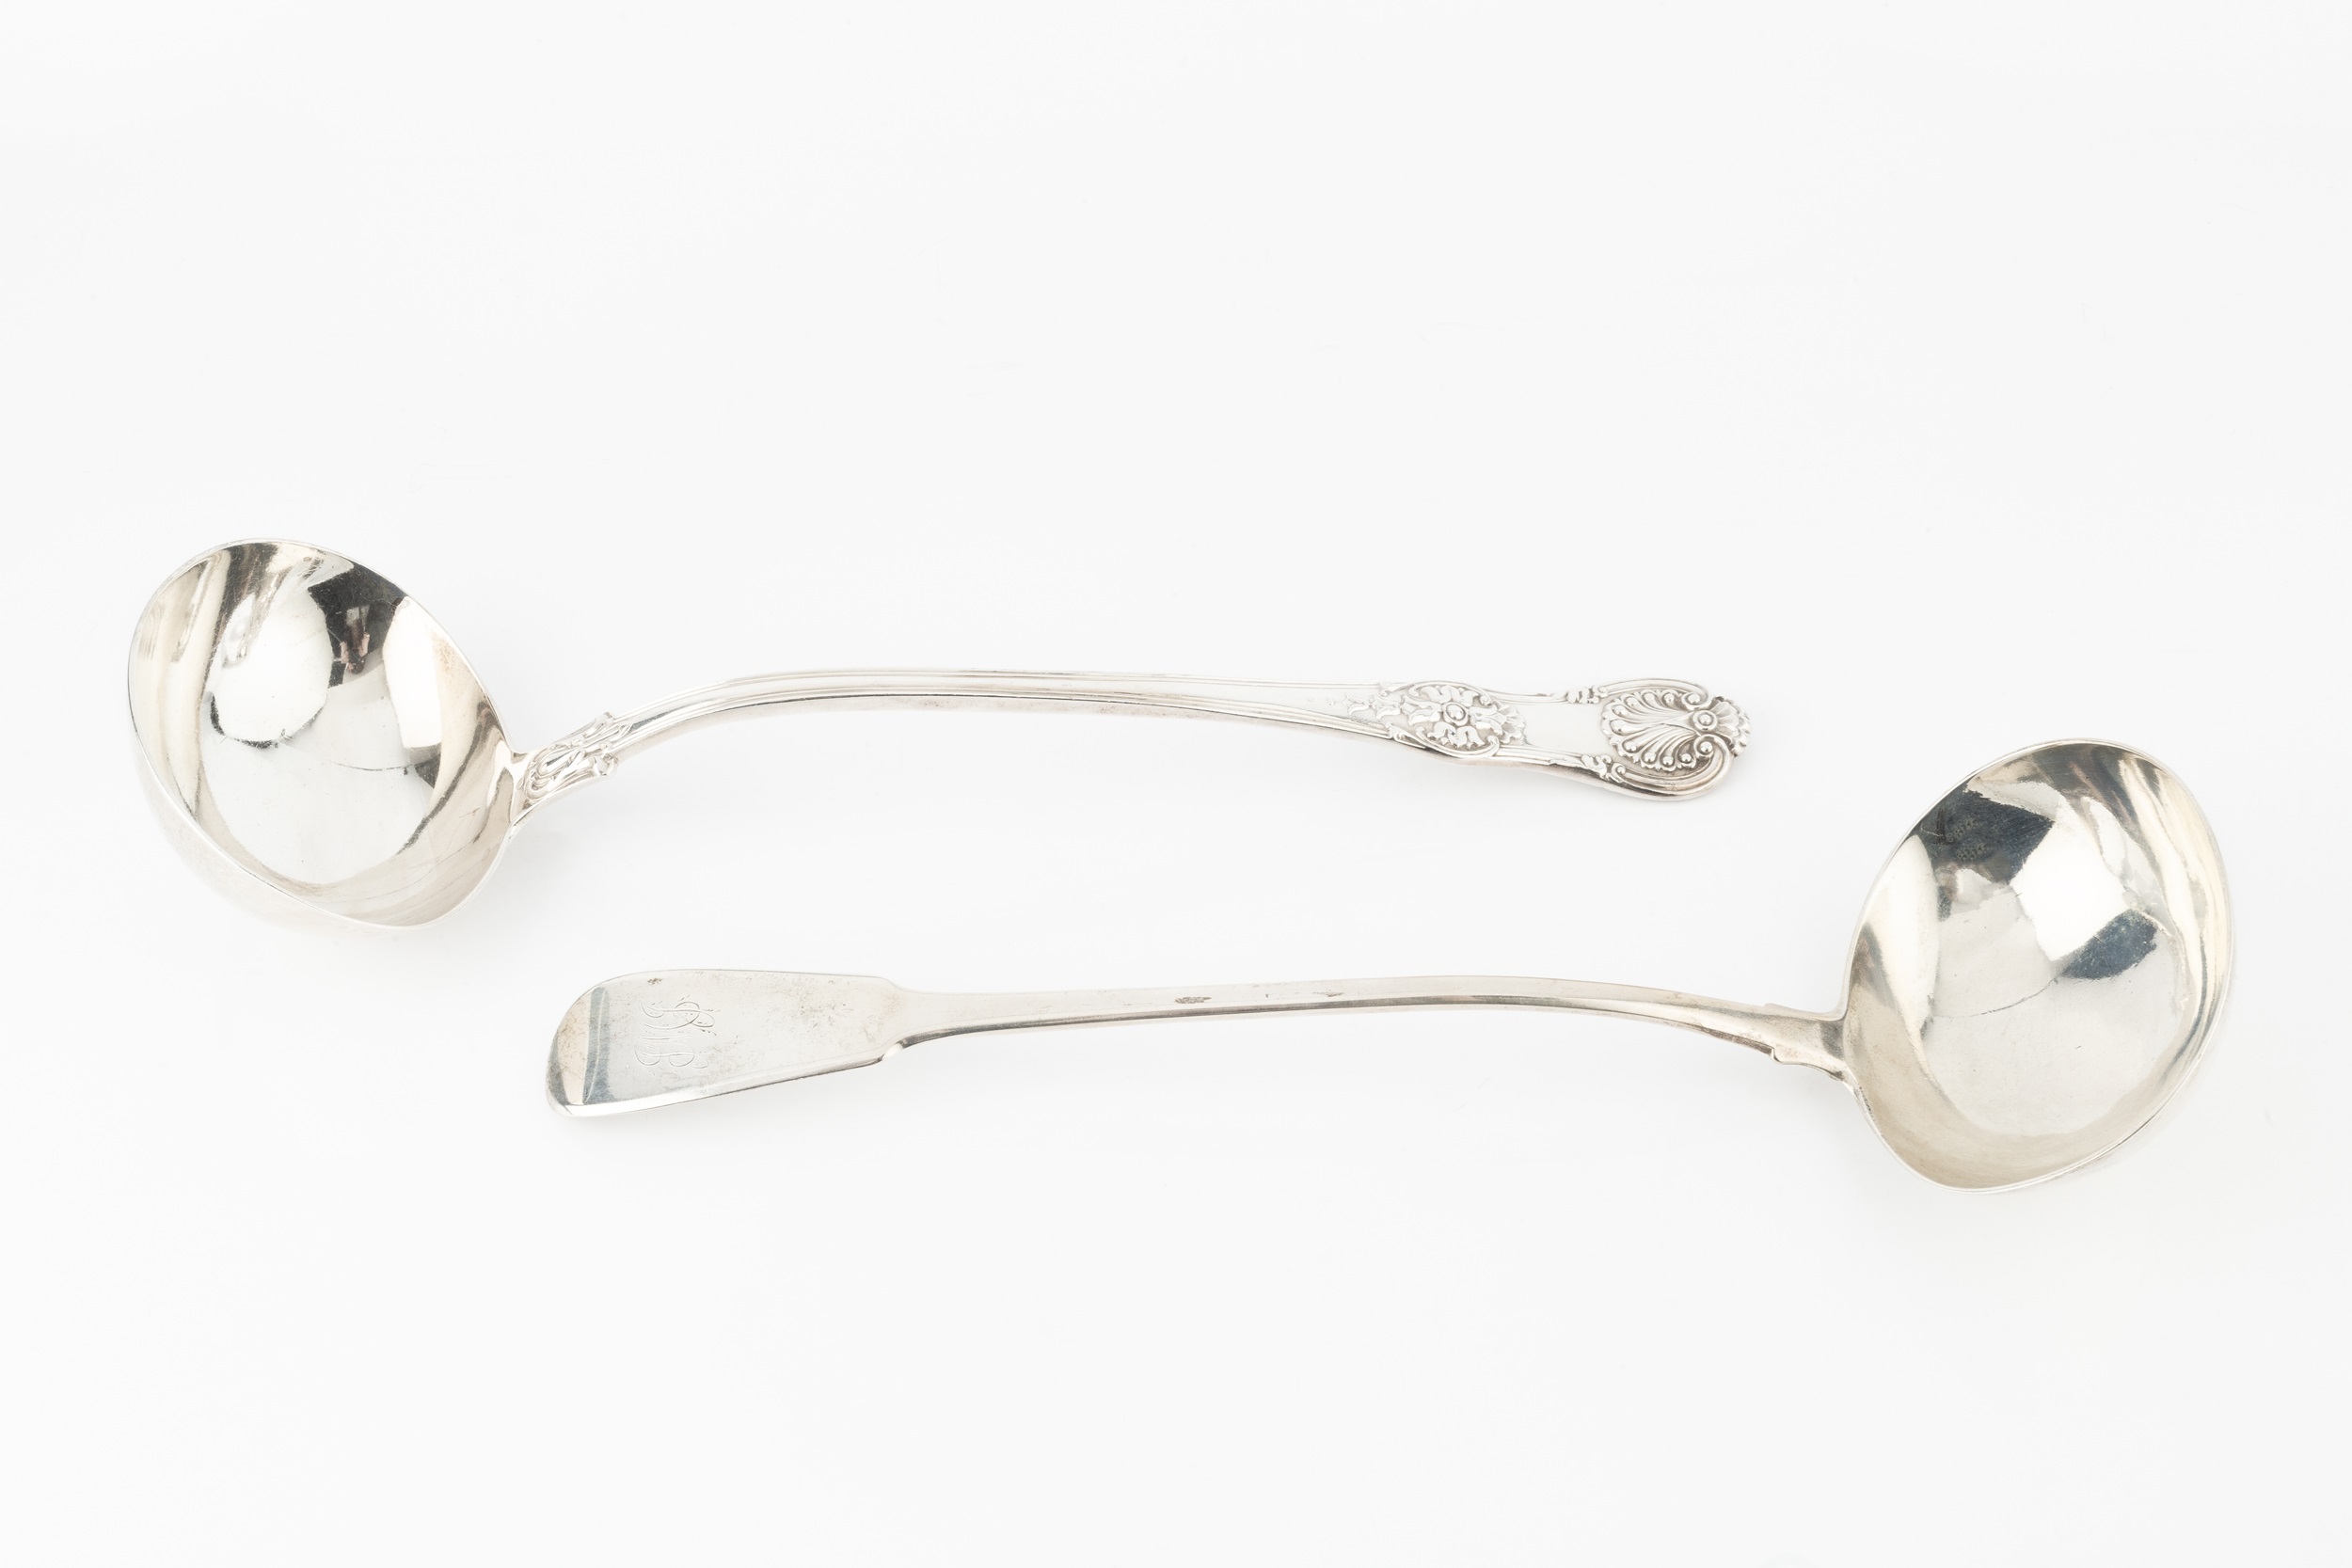 A George IV silver King's pattern soup ladle, by Charles Eley, London 1824, 34cm long, and a